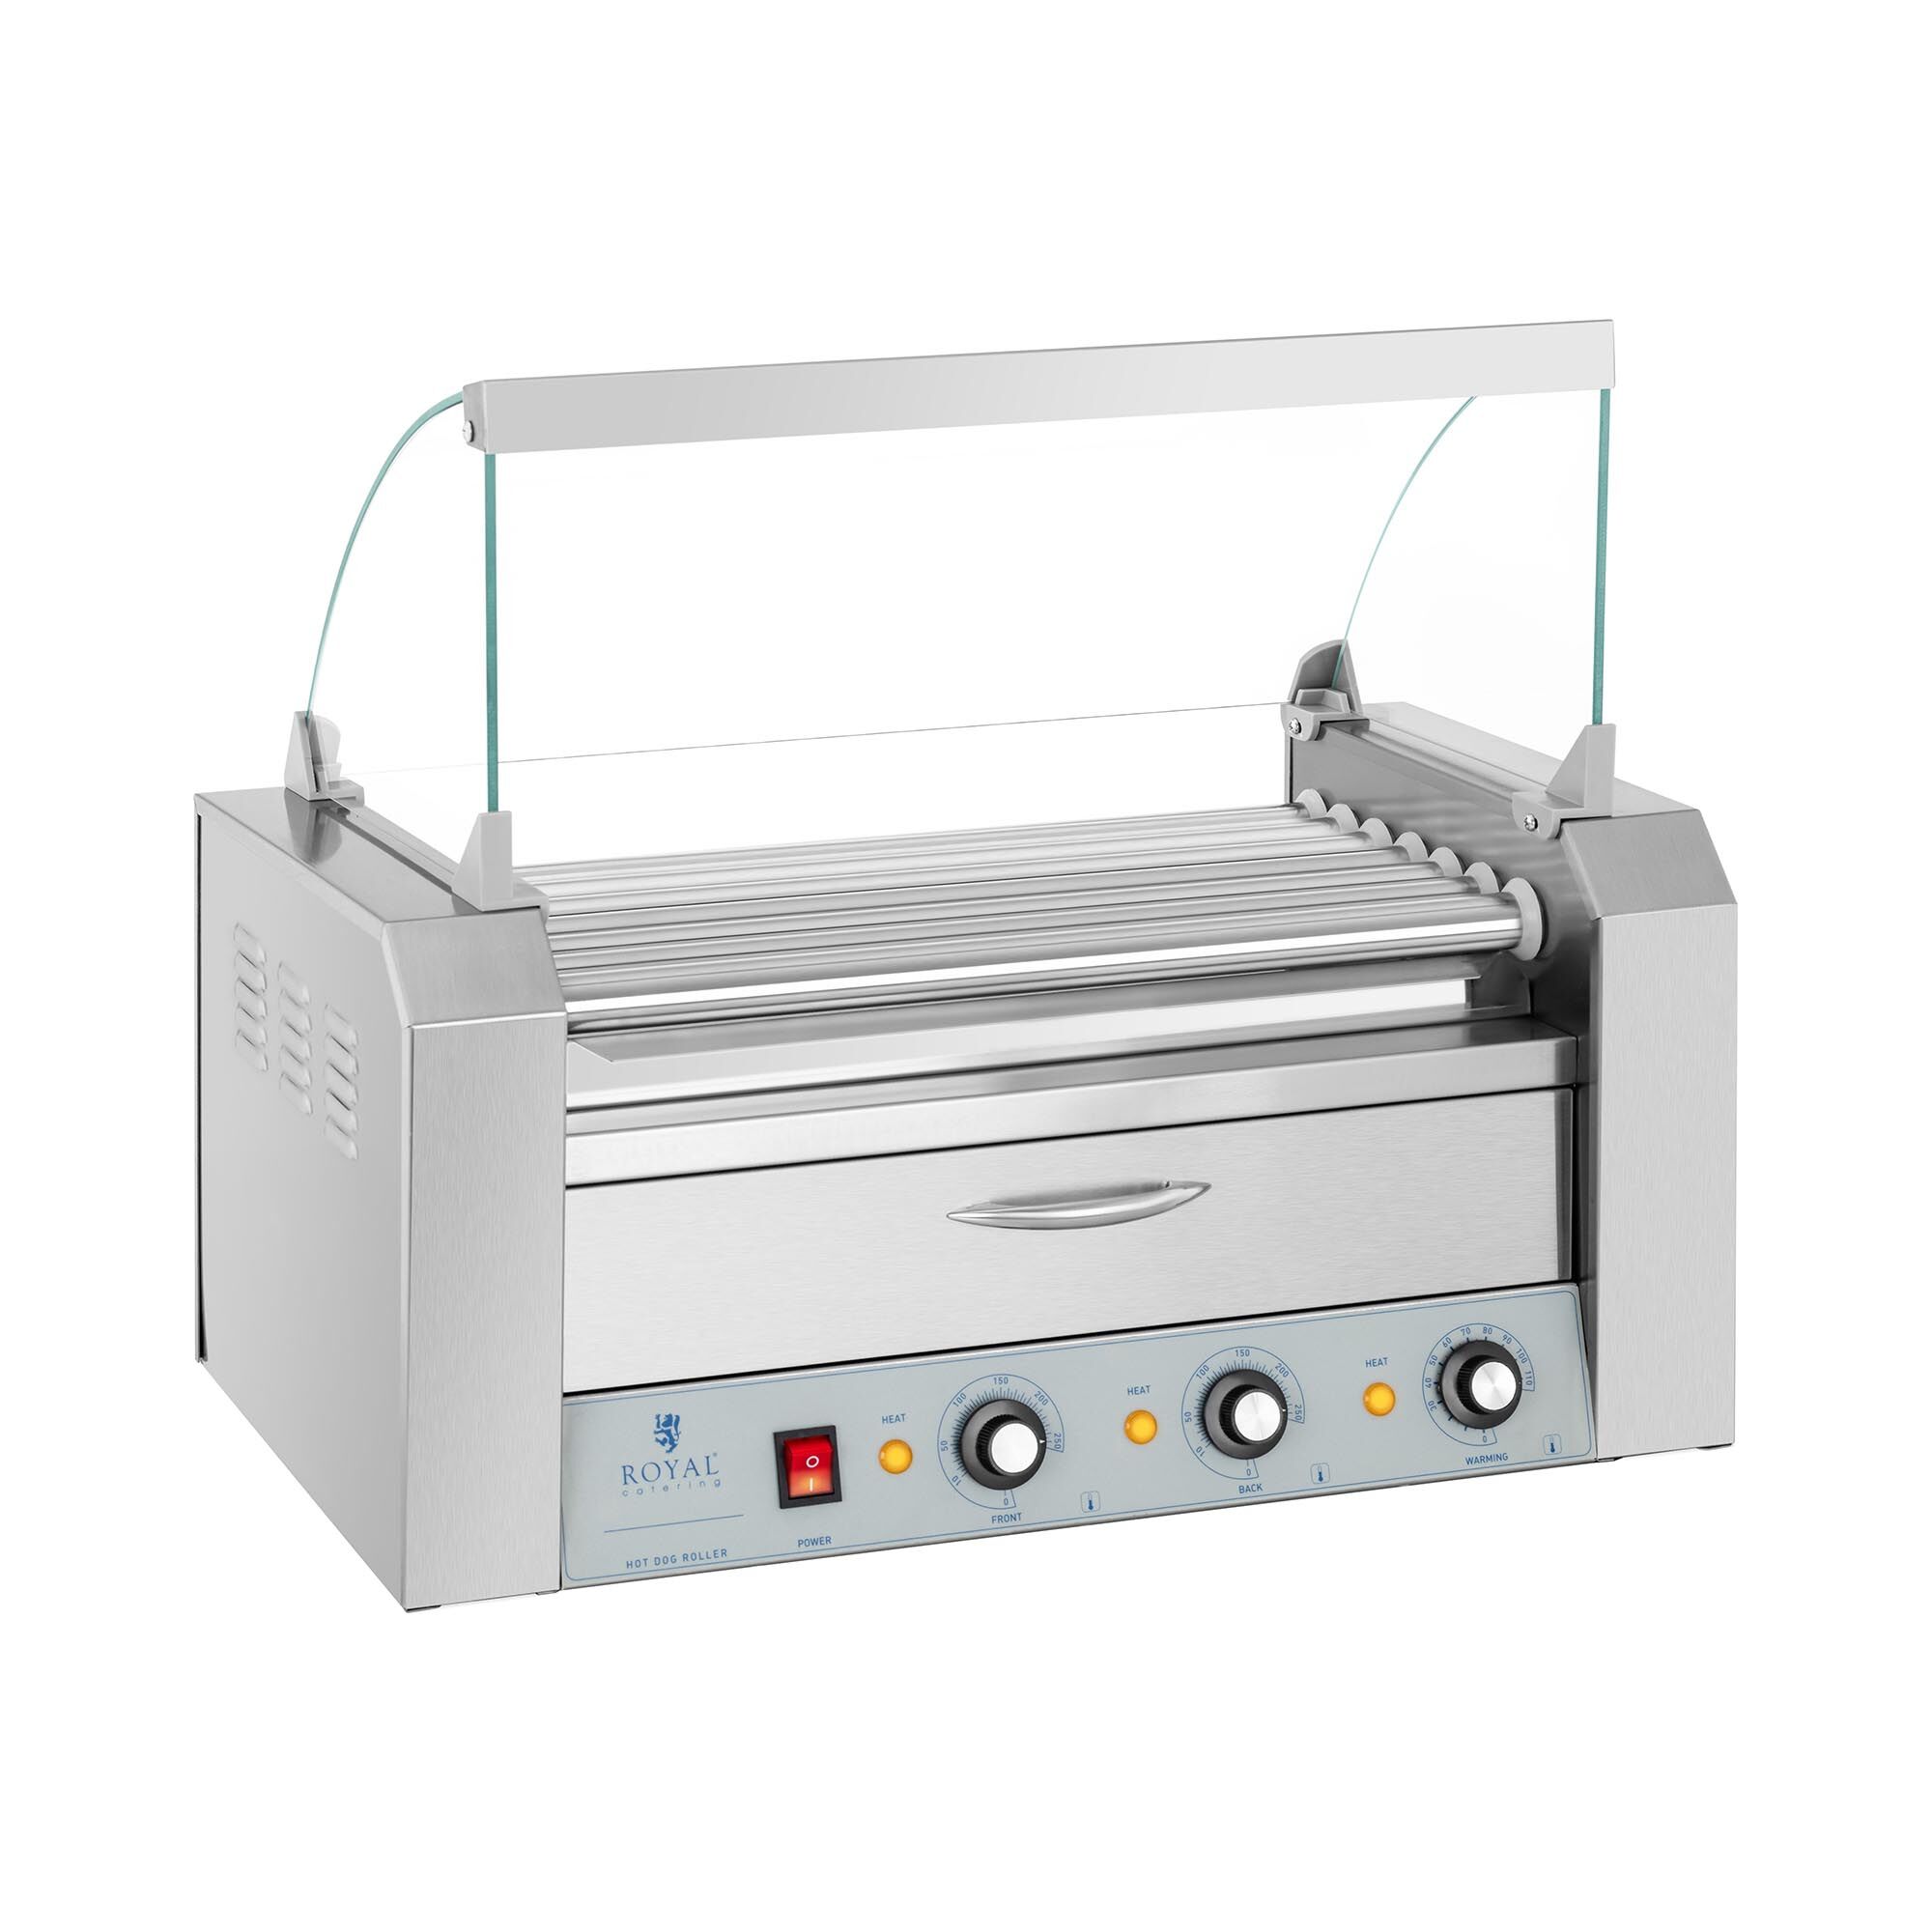 Royal Catering Hot Dog Grill - 7 rollers - warming drawer - stainless steel RC-RG7DC